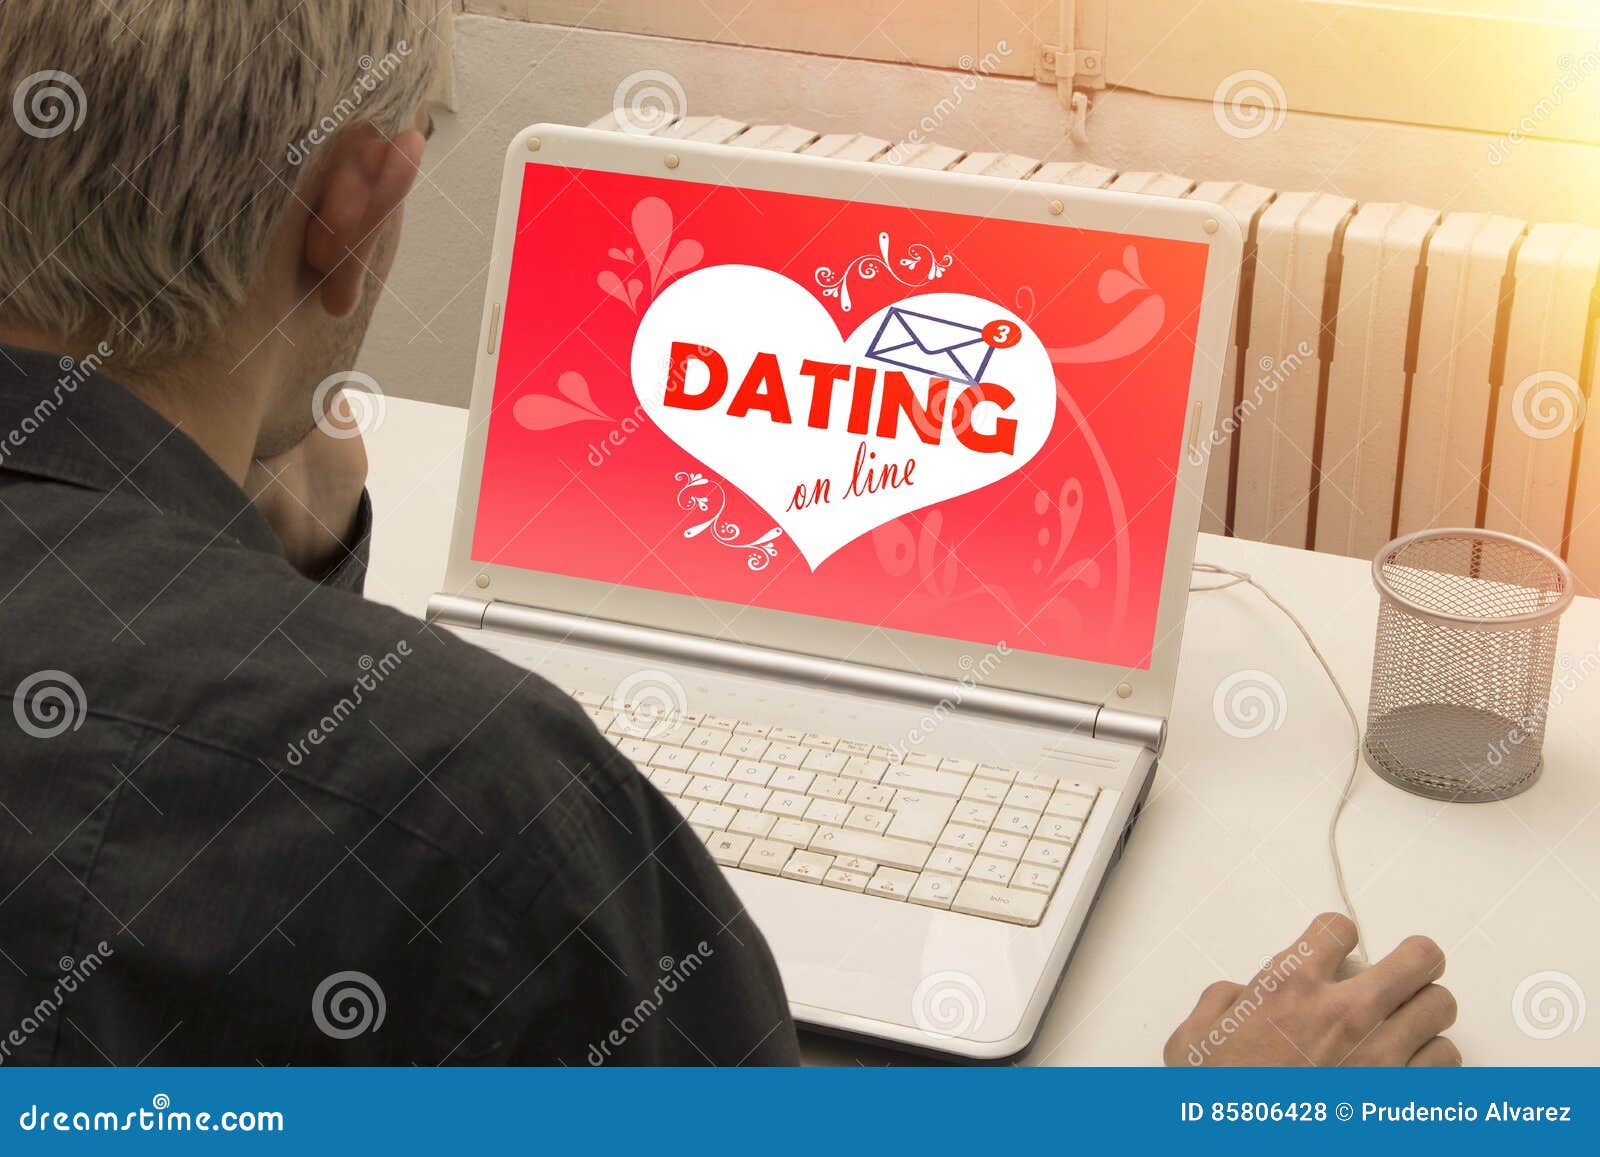 compare online dating and traditional dating